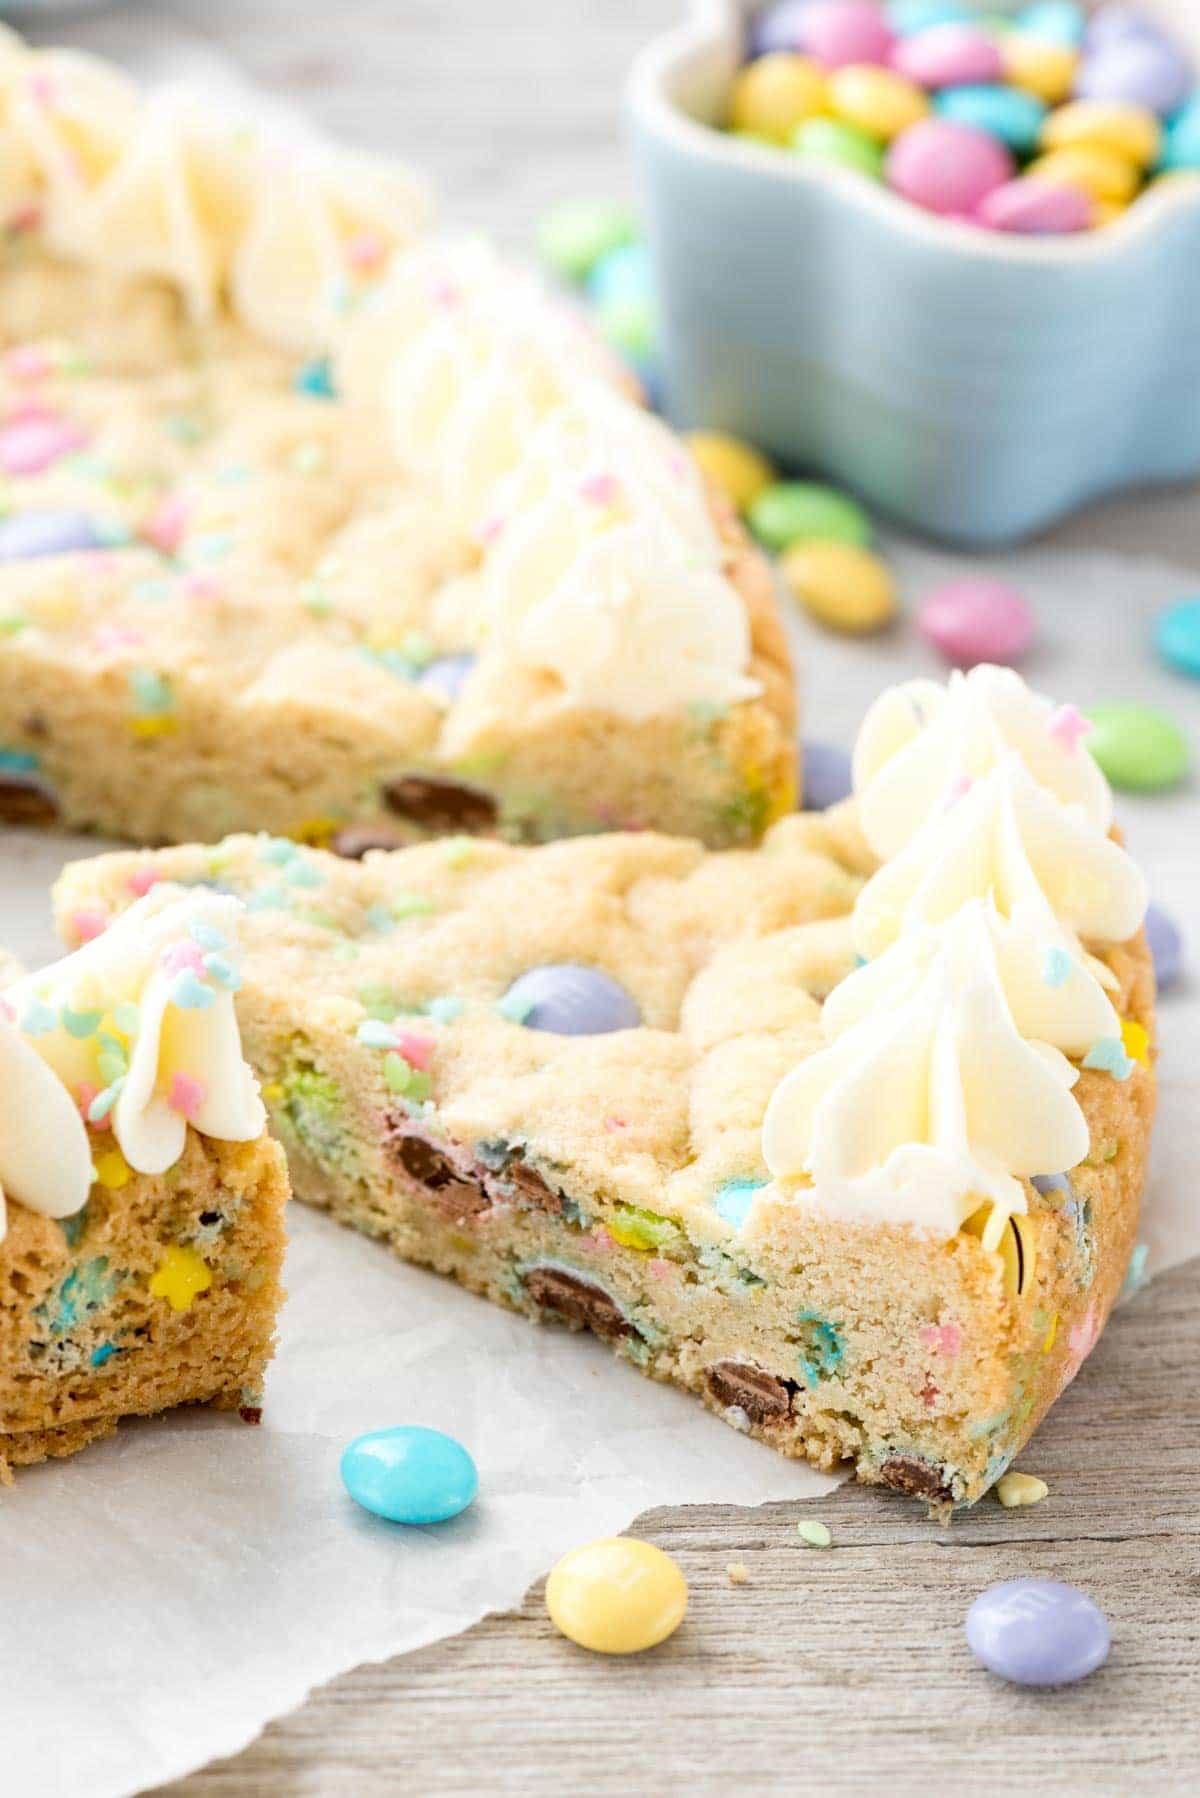 Easter Sugar Cookie Cake - this easy sugar cookie recipe is filled with spring M&Ms and sprinkles and baked in a cake pan. Make an easy frosting and you have the perfect spring cookie cake!